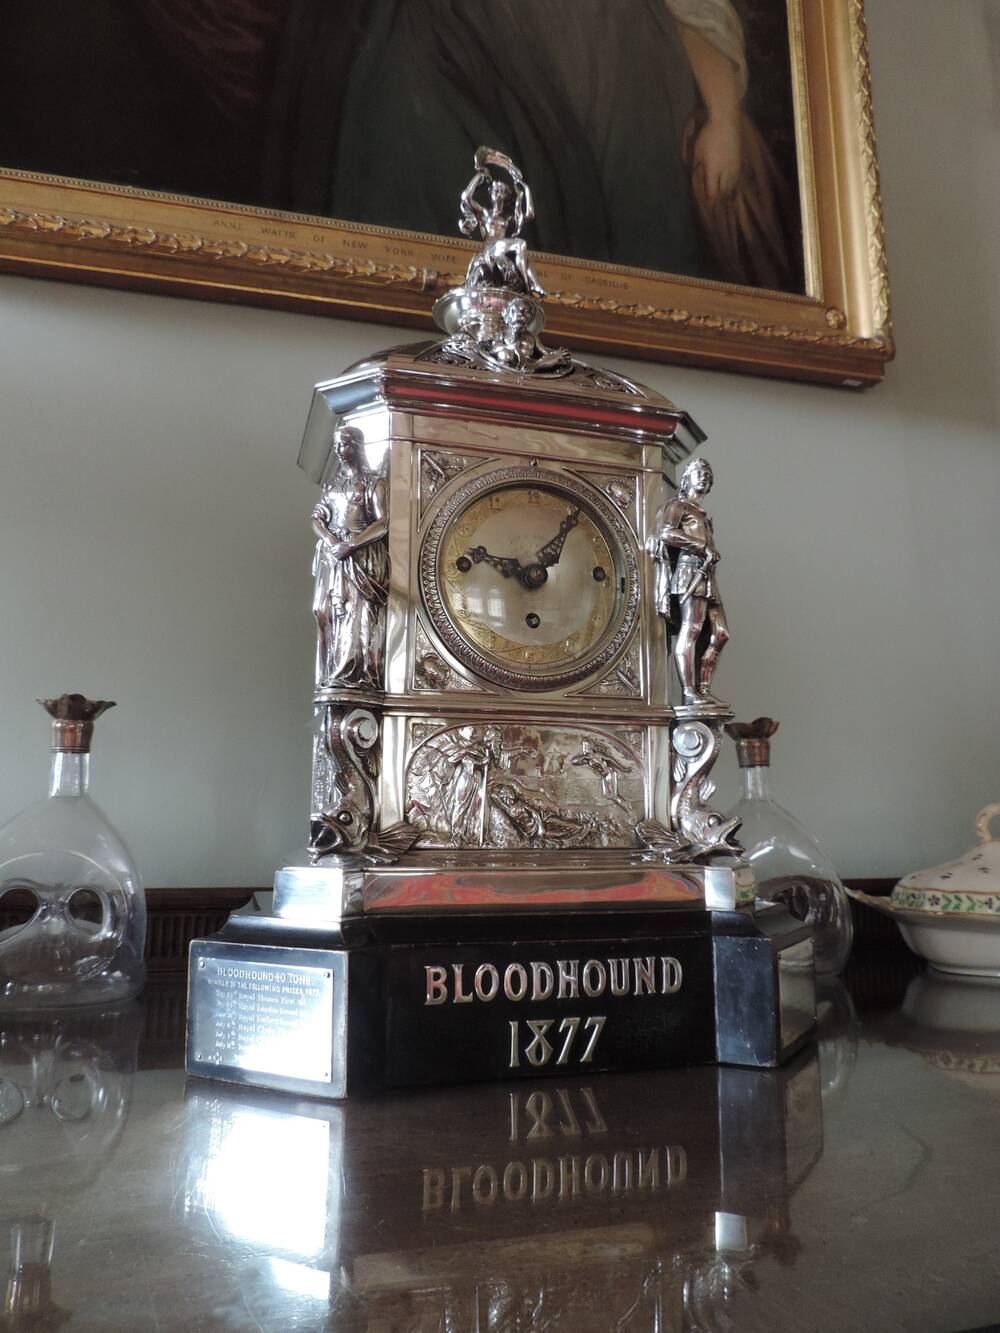 A silver carriage clock stands on a polished shelf, with two glass bottles either side. A gilt frame can be seen behind. The silver clock stands on a marble plinth, inscribed with Bloodhound 1877. There is a plaque with a list of dates on the side panel of the plinth. On top of the clock is a small silver figurine of a seated woman, holding a long banner above her head.